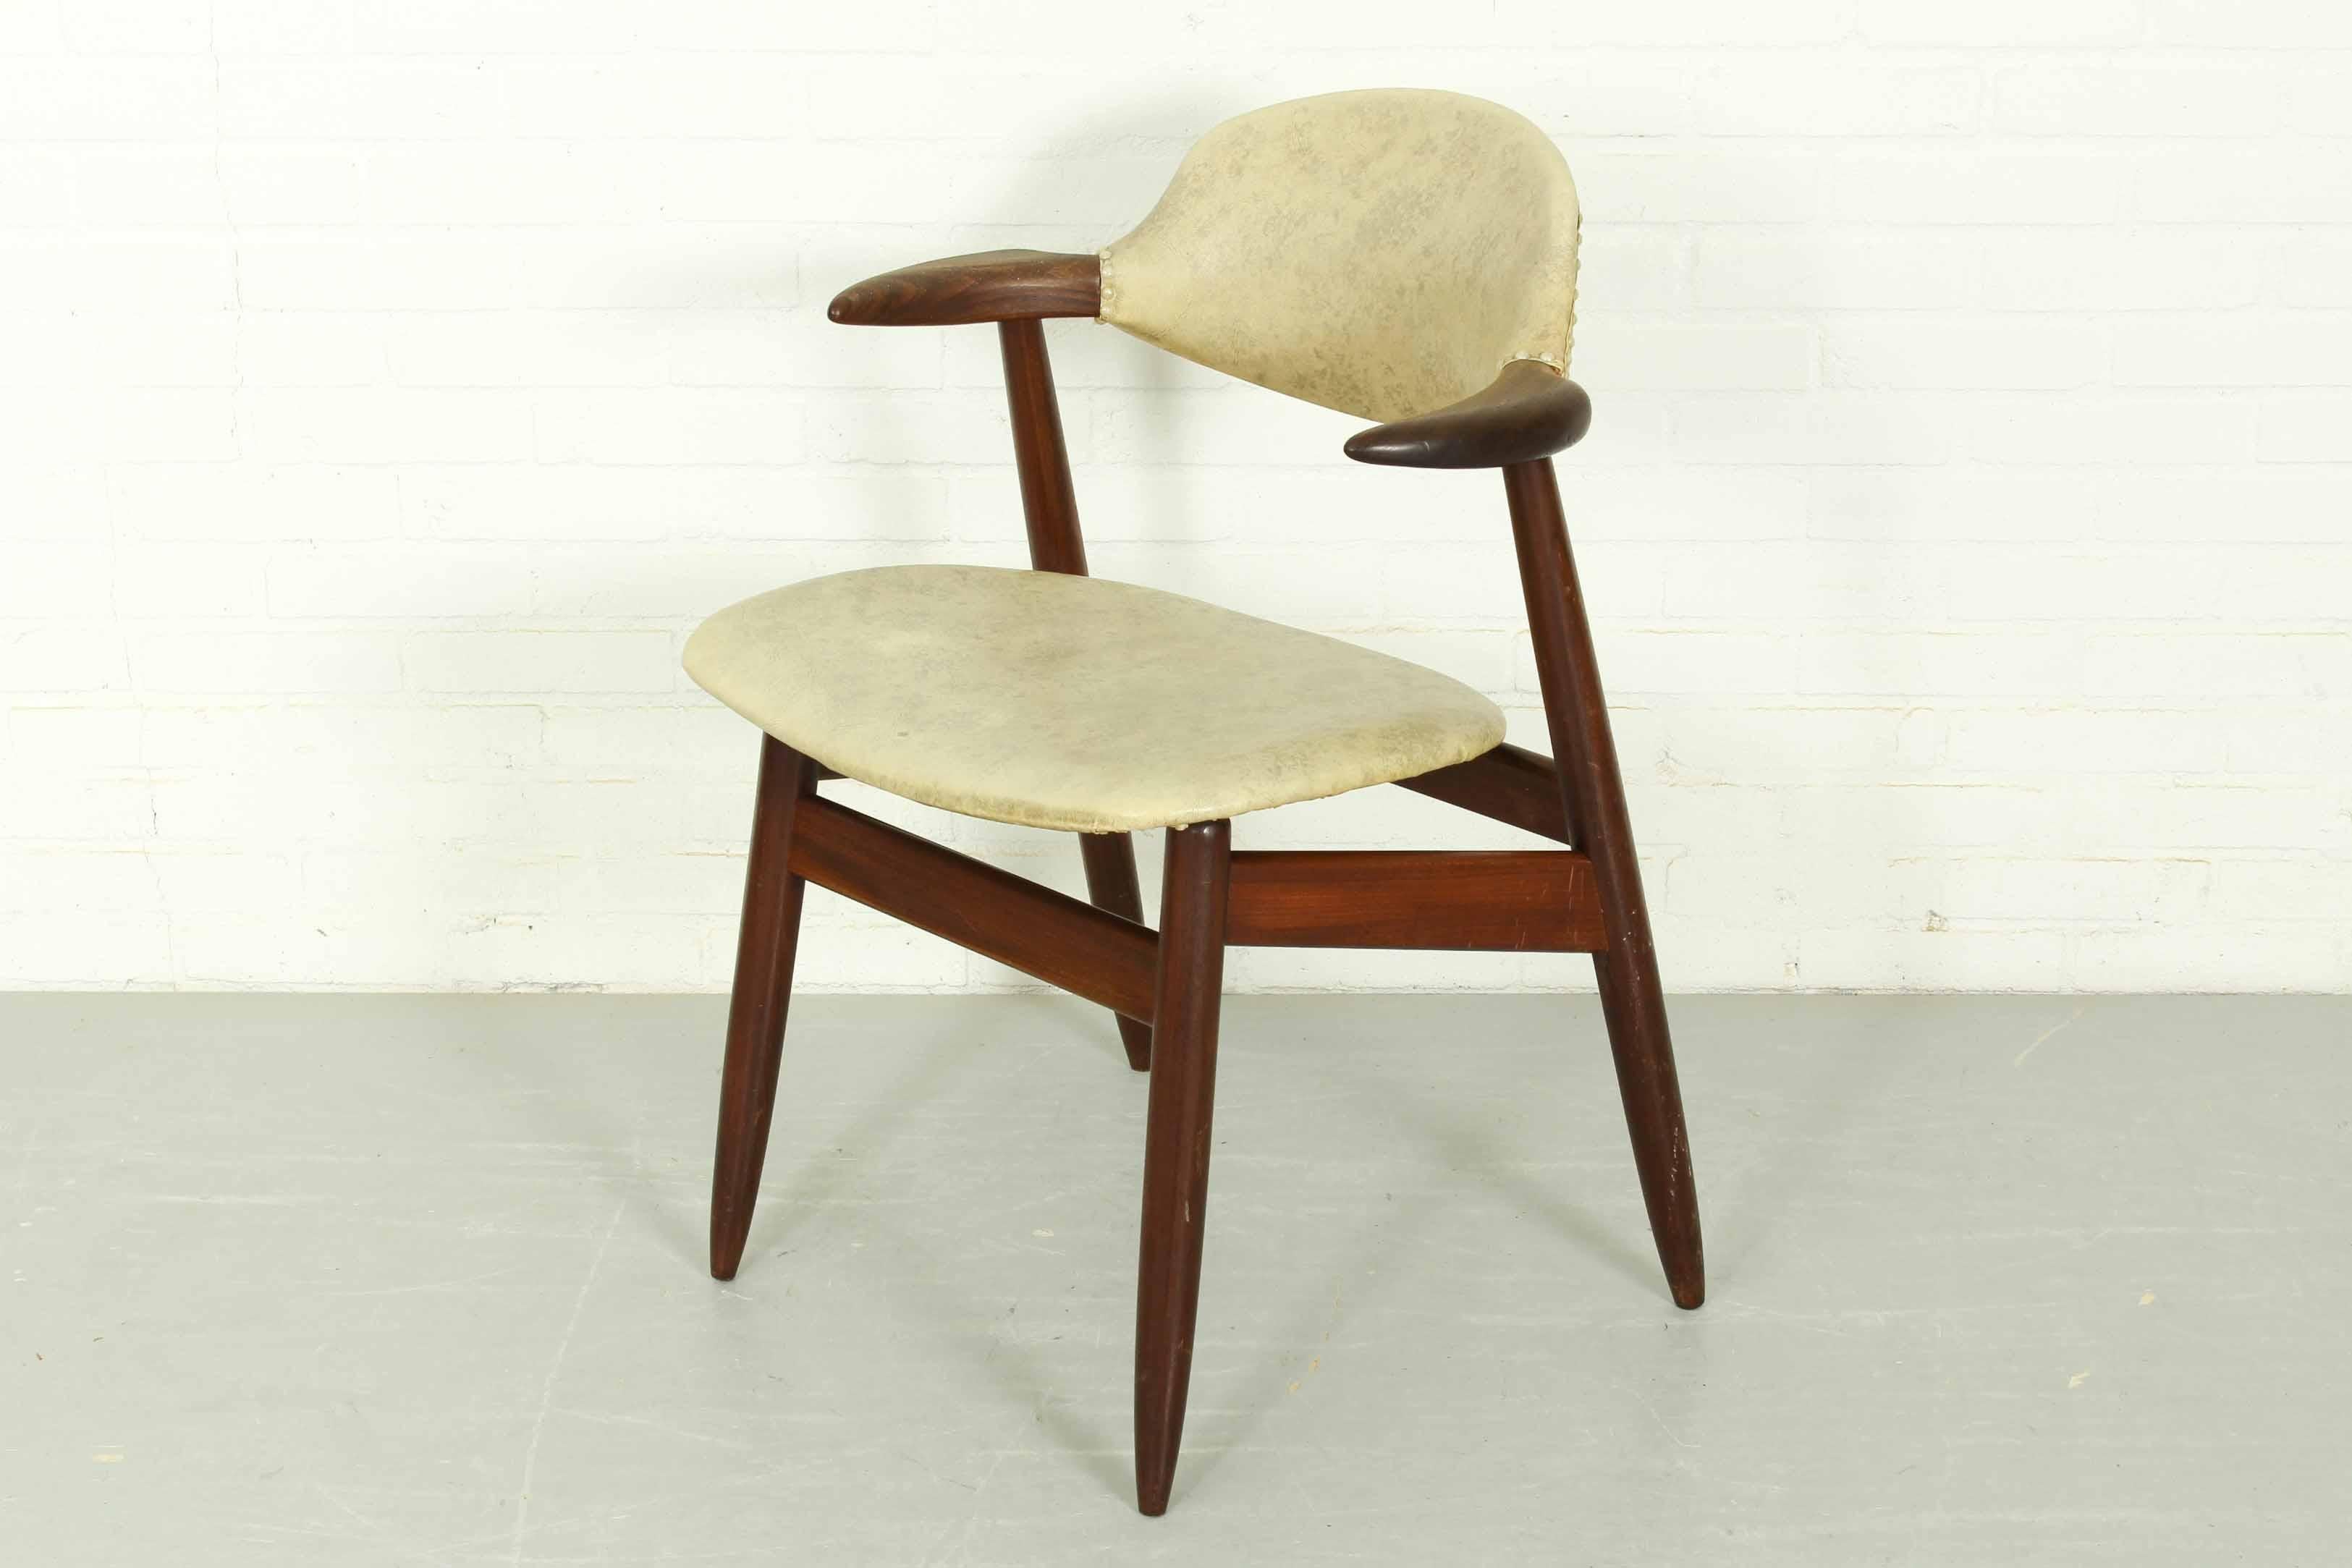 20th Century Mid-Century Modern Solid Teak Tijsseling Cowhorn Chair, 1960s For Sale